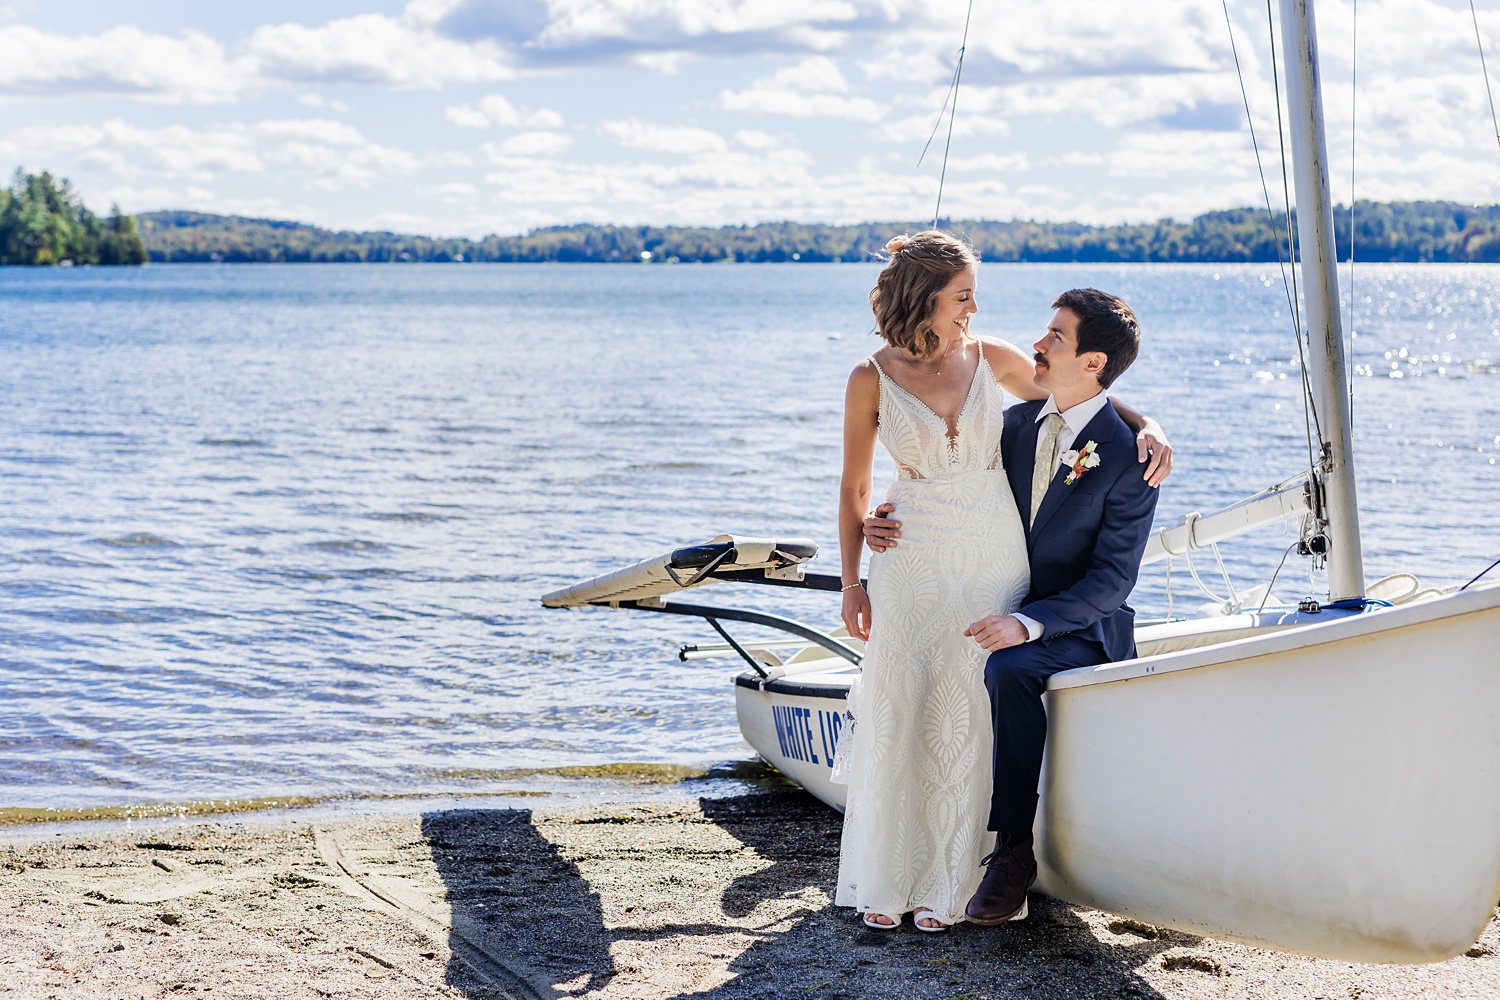 Bride and groom settle on a boat sitting shoreside on the lake